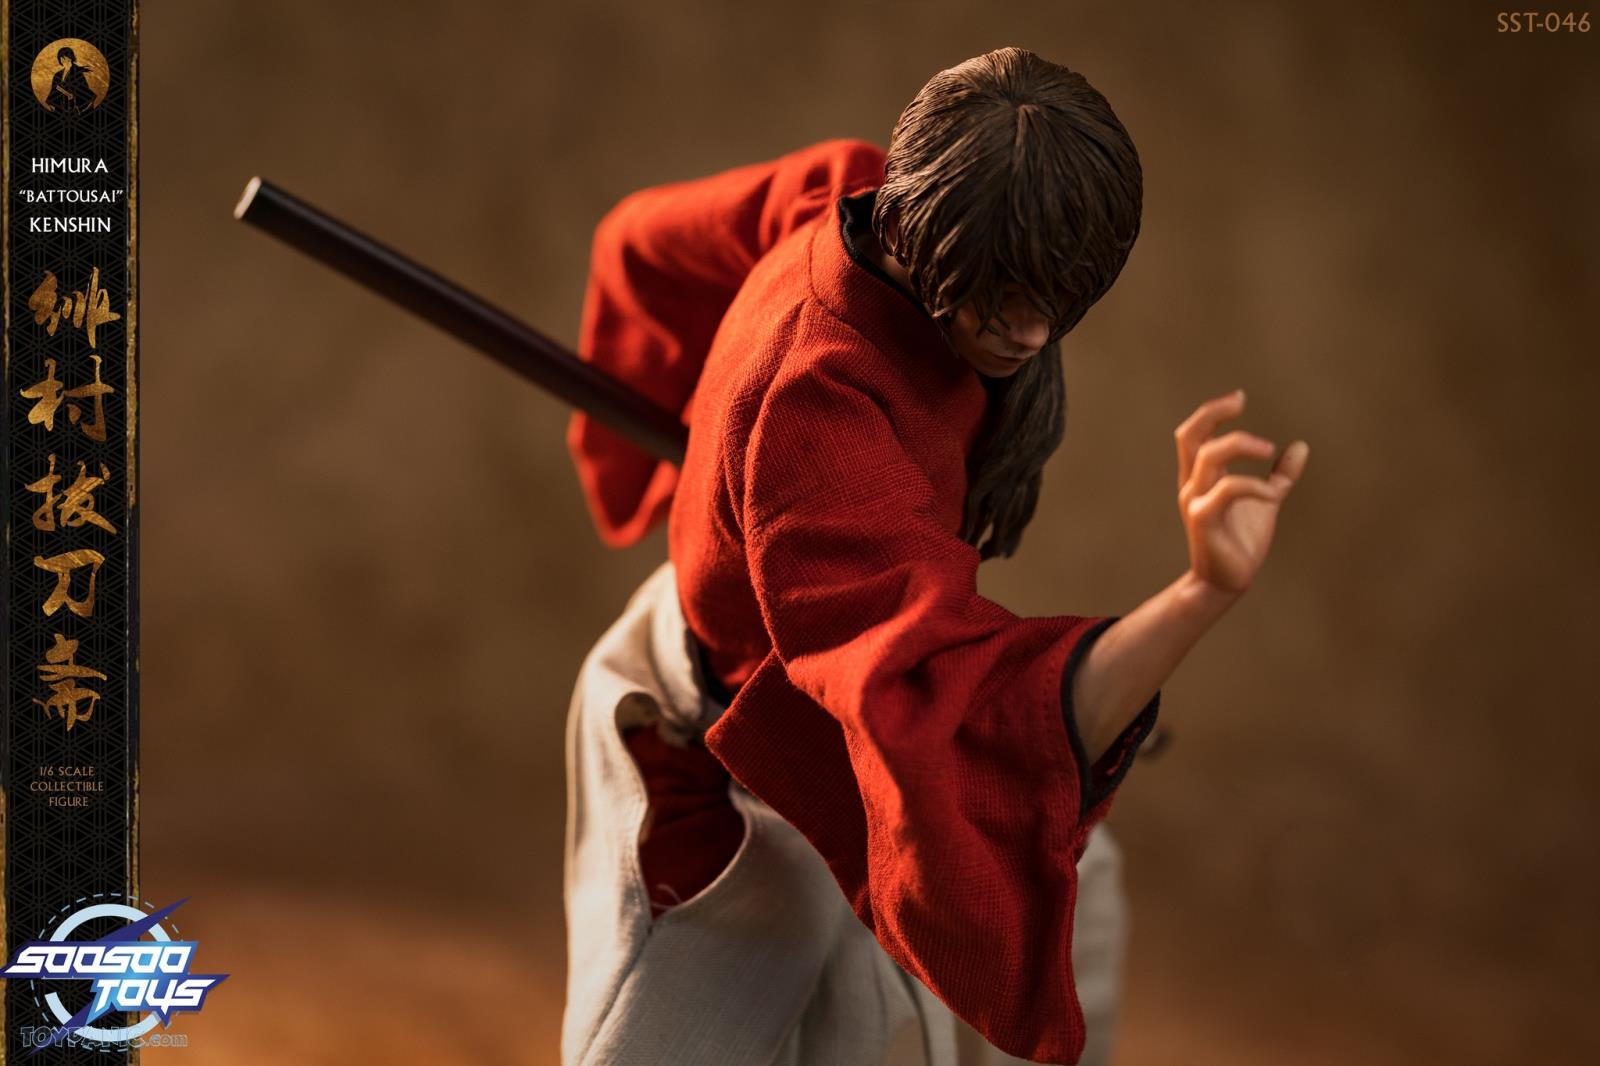 kenshin - NEW PRODUCT: 1/6 scale Rurouni Kenshin Collectible Figure from SooSooToys 712202251231PM_2000183